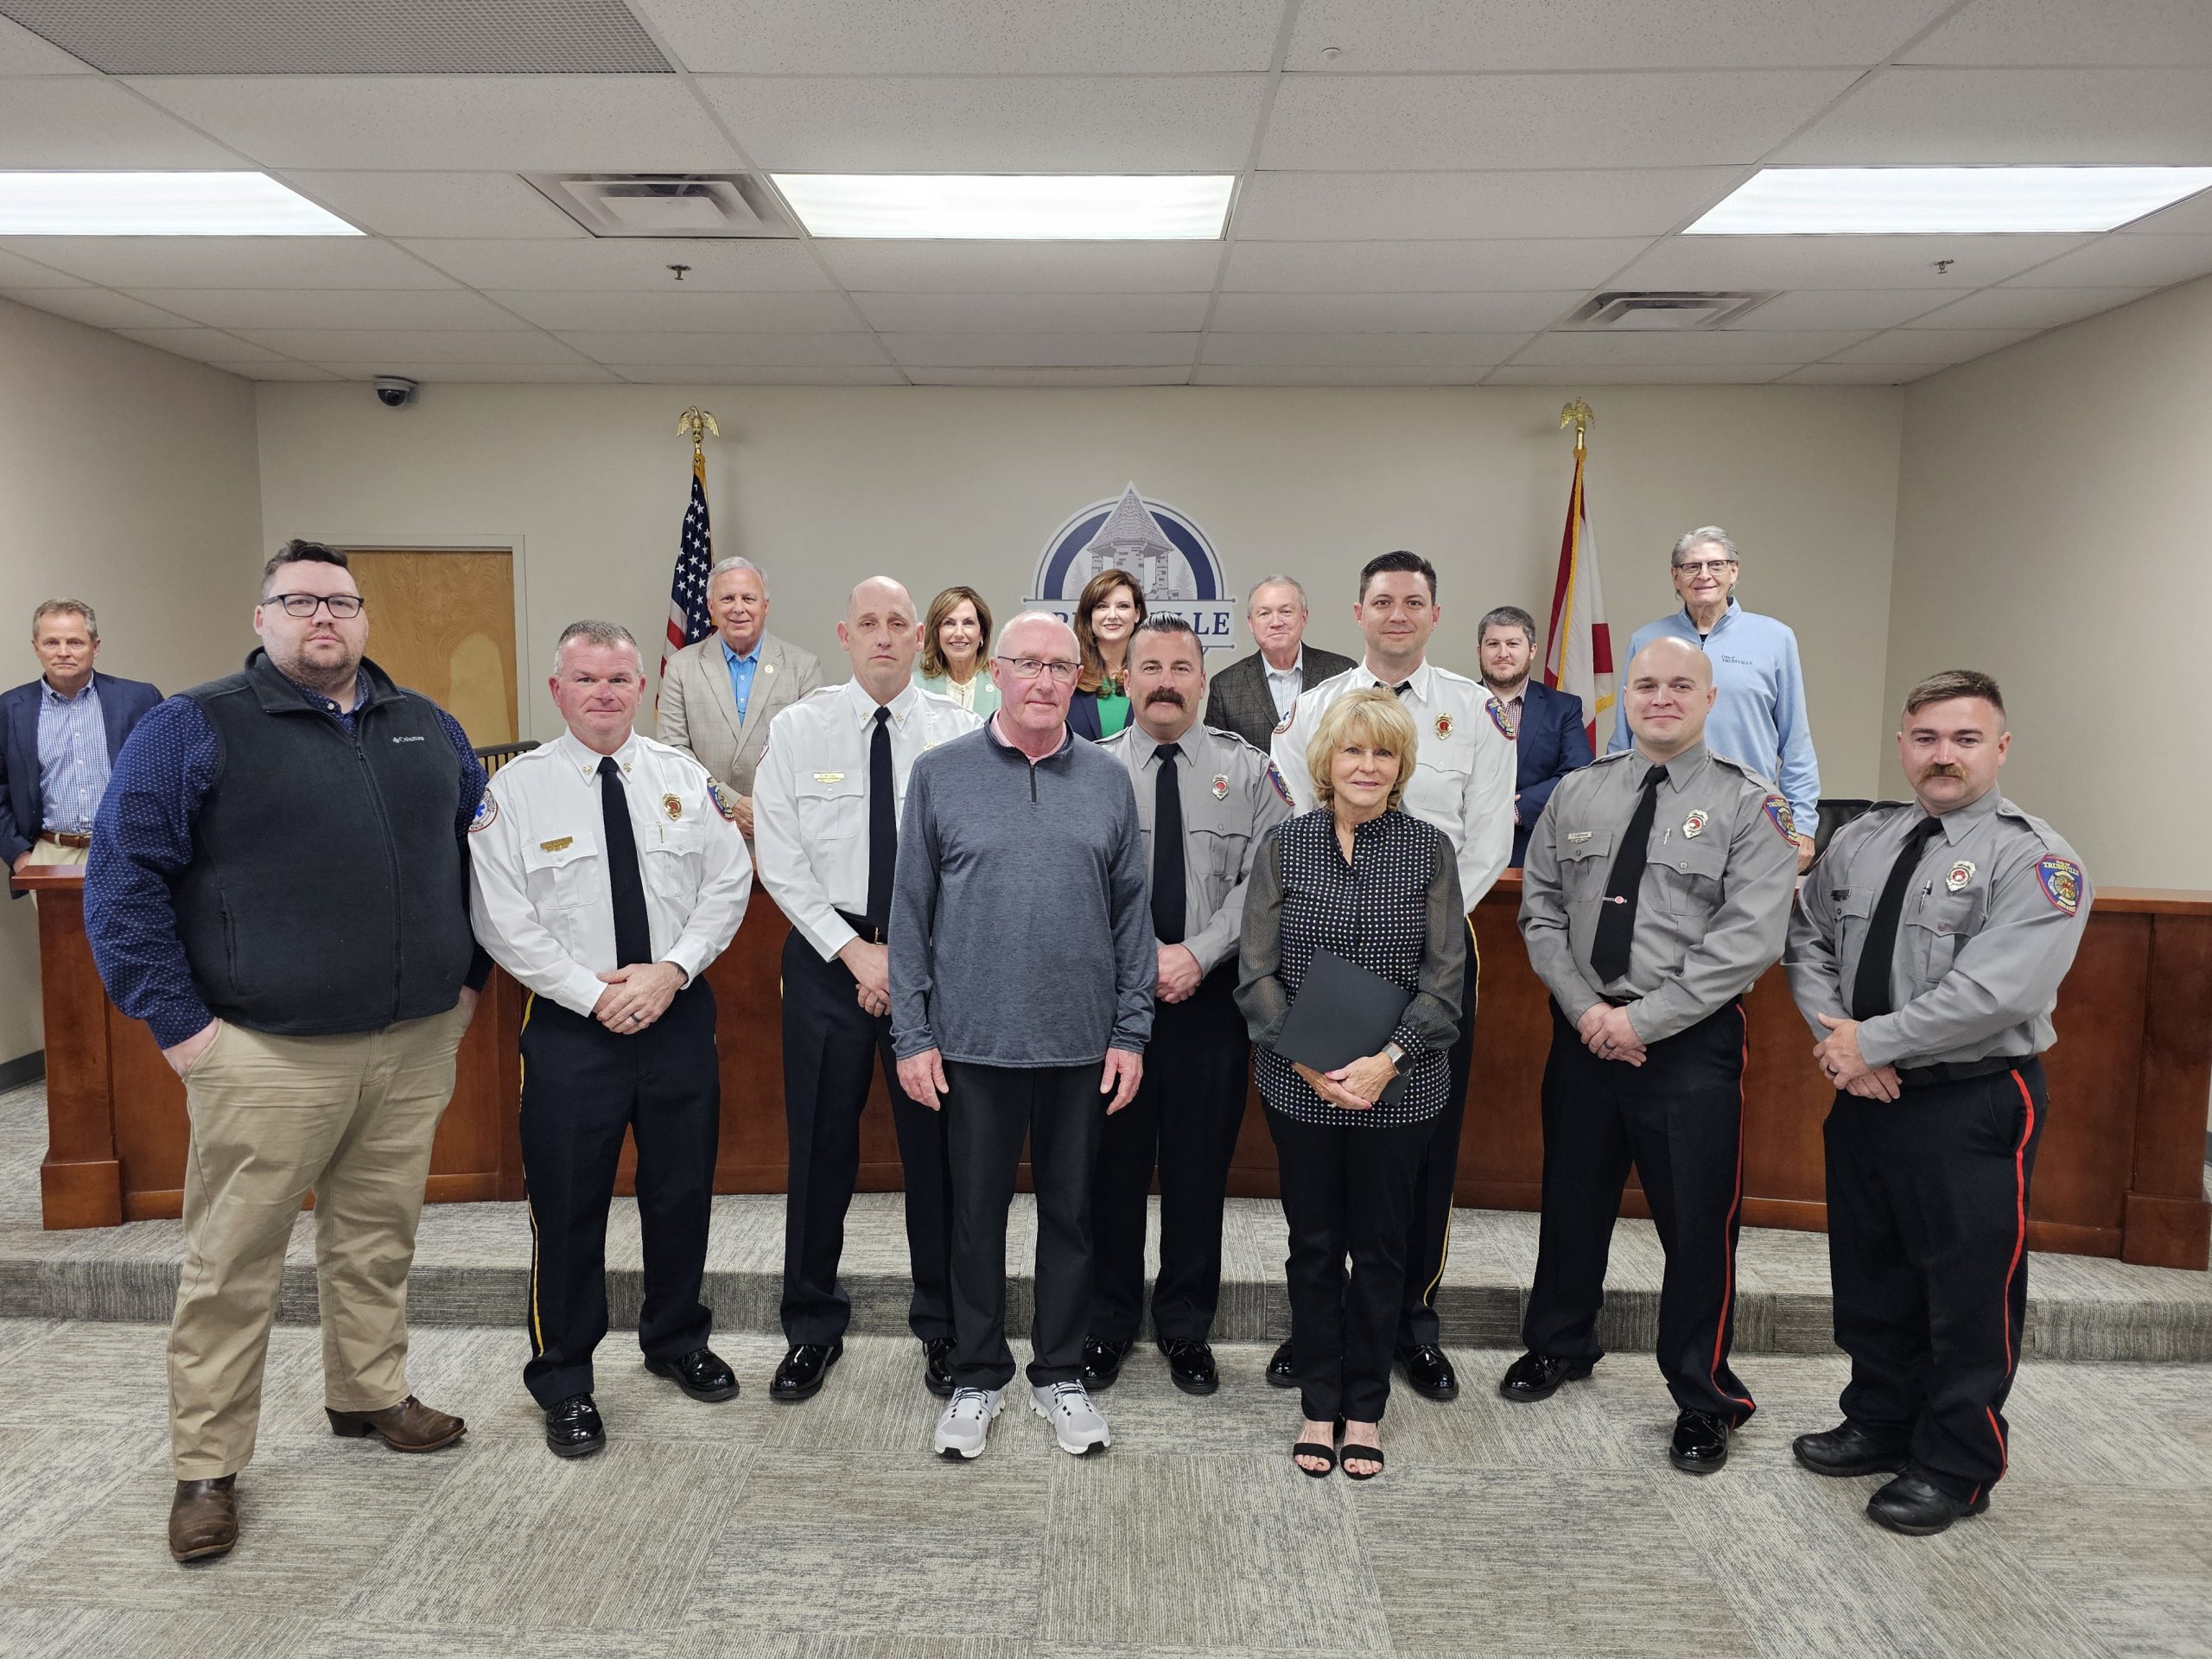 Trussville Citizens, Fire Department honored for life-saving actions